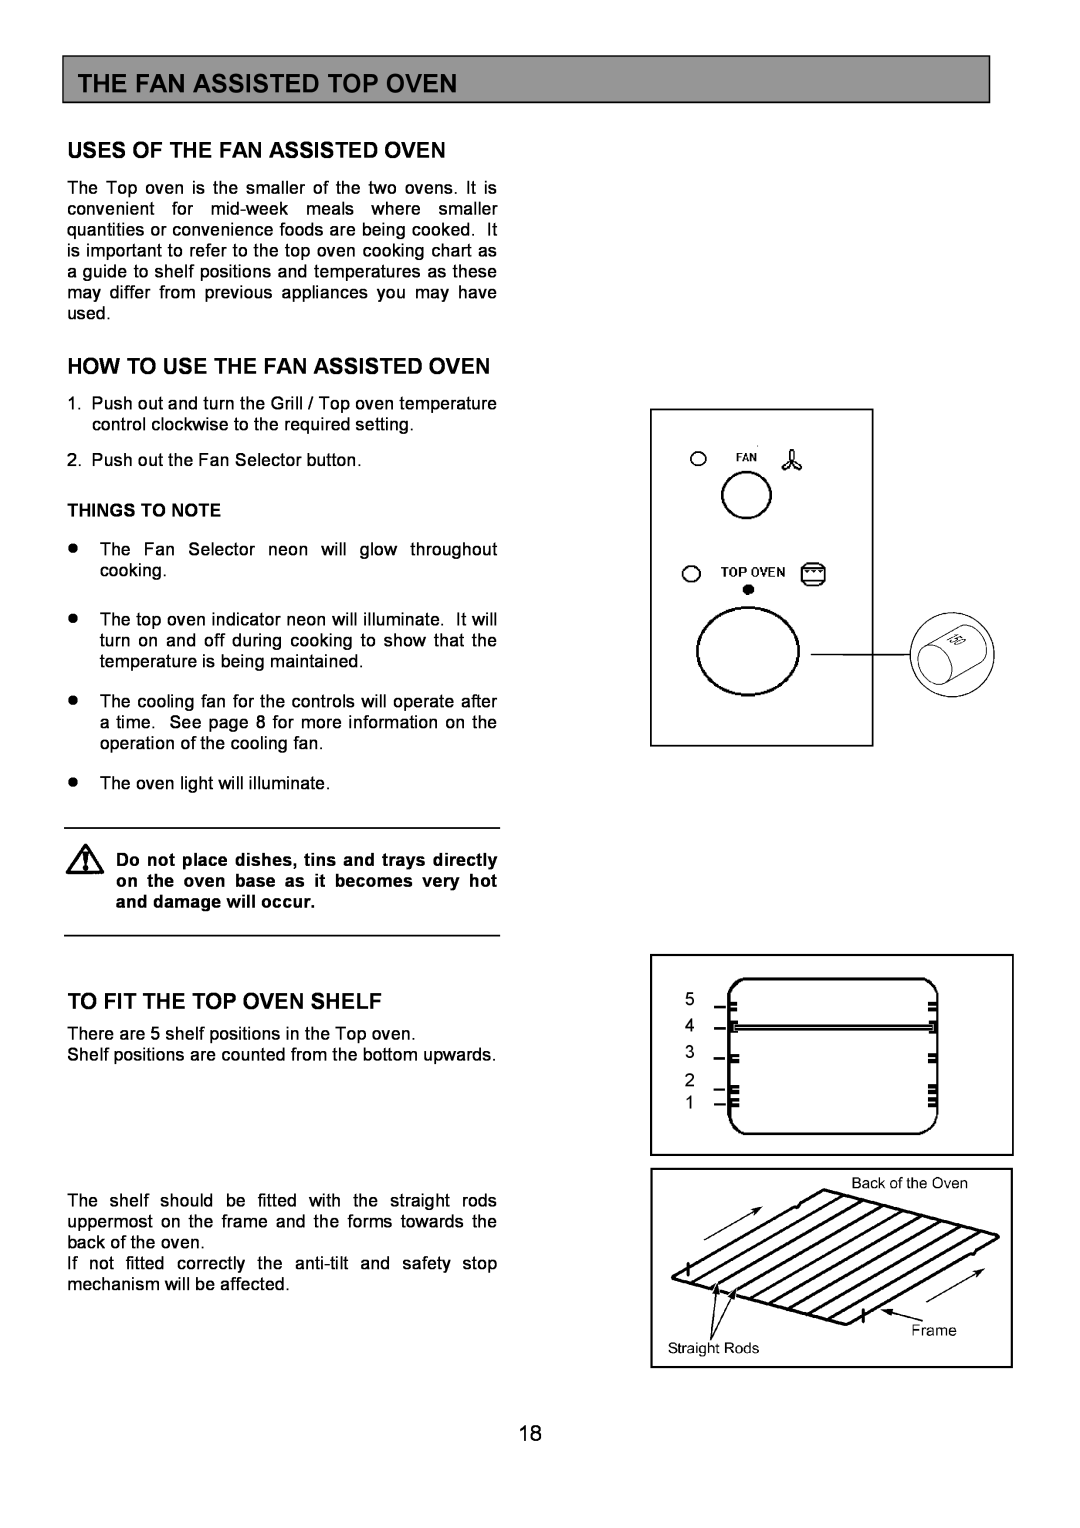 Zanussi 311608901 manual The Fan Assisted Top Oven, Uses Of The Fan Assisted Oven, How To Use The Fan Assisted Oven 